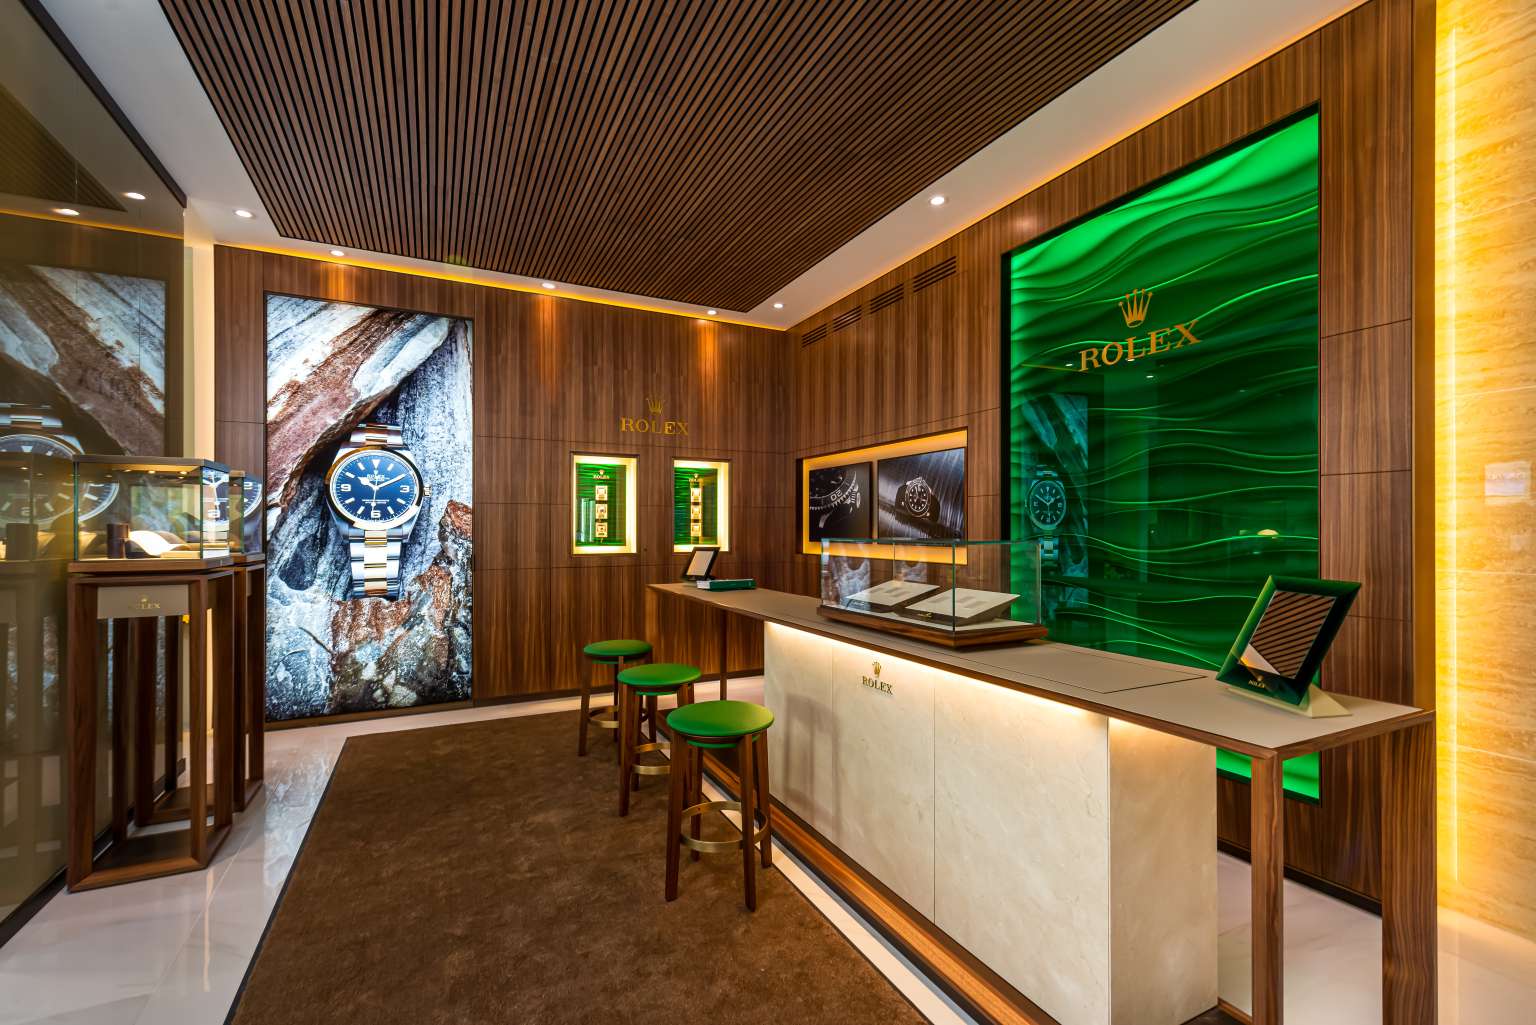 A picture of our Rolex storefront in Bonaire